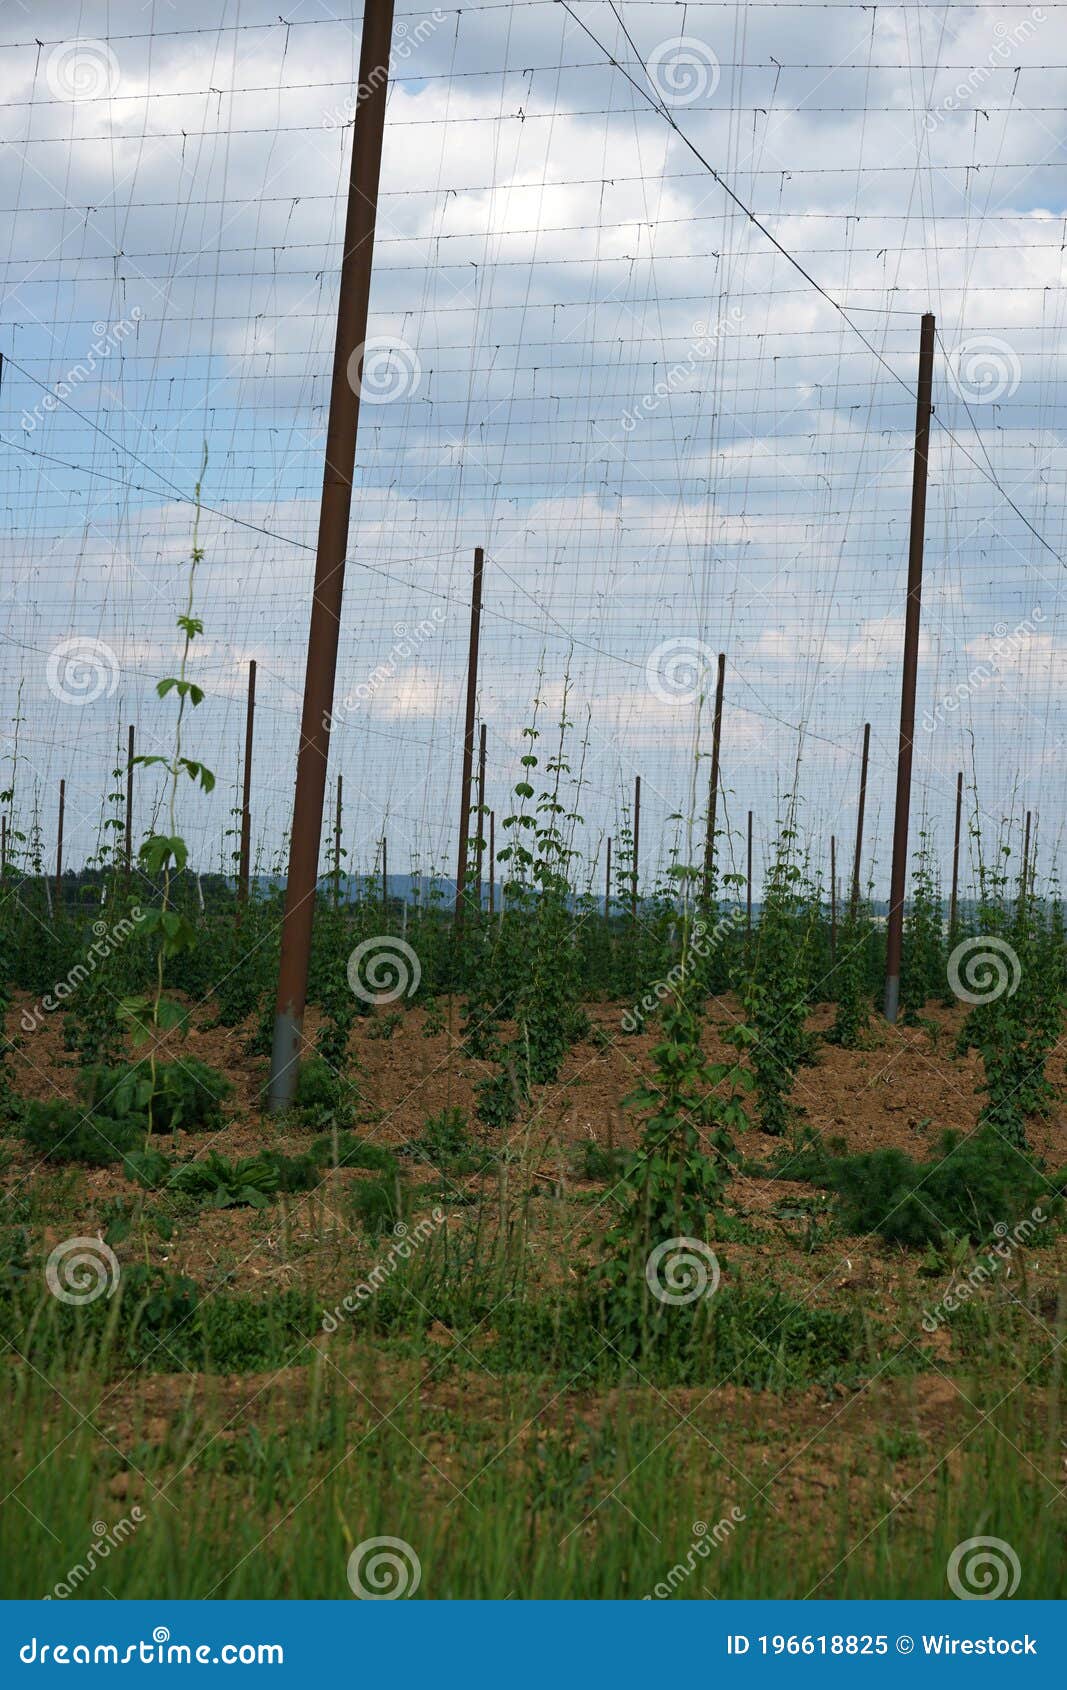 land plot with plantings and metal vineyard posts